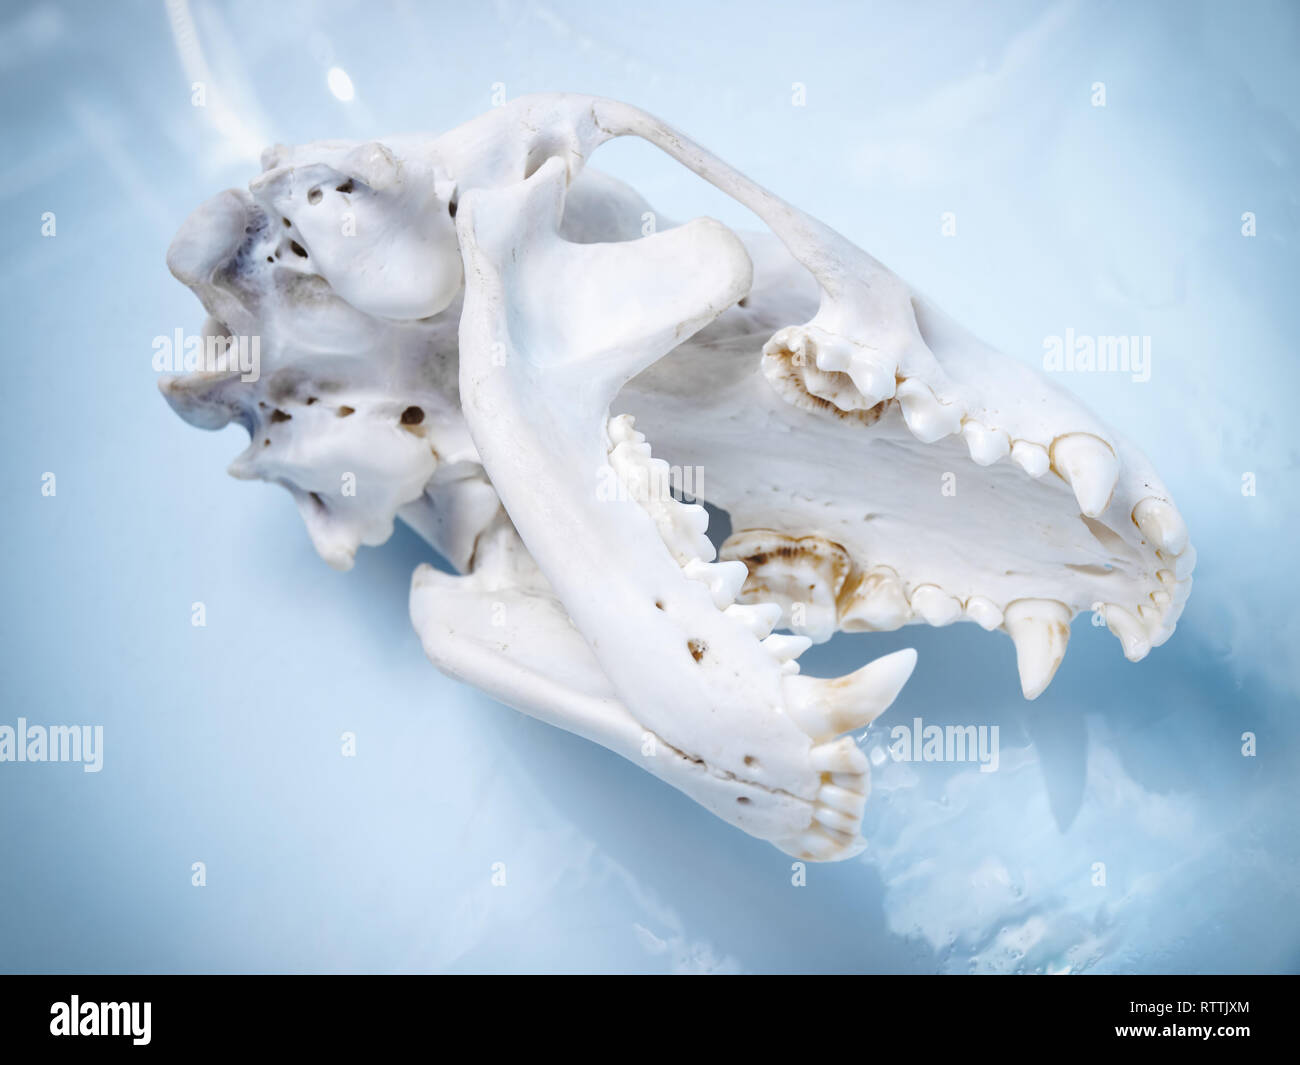 Badger skull on a bright background. Stock Photo